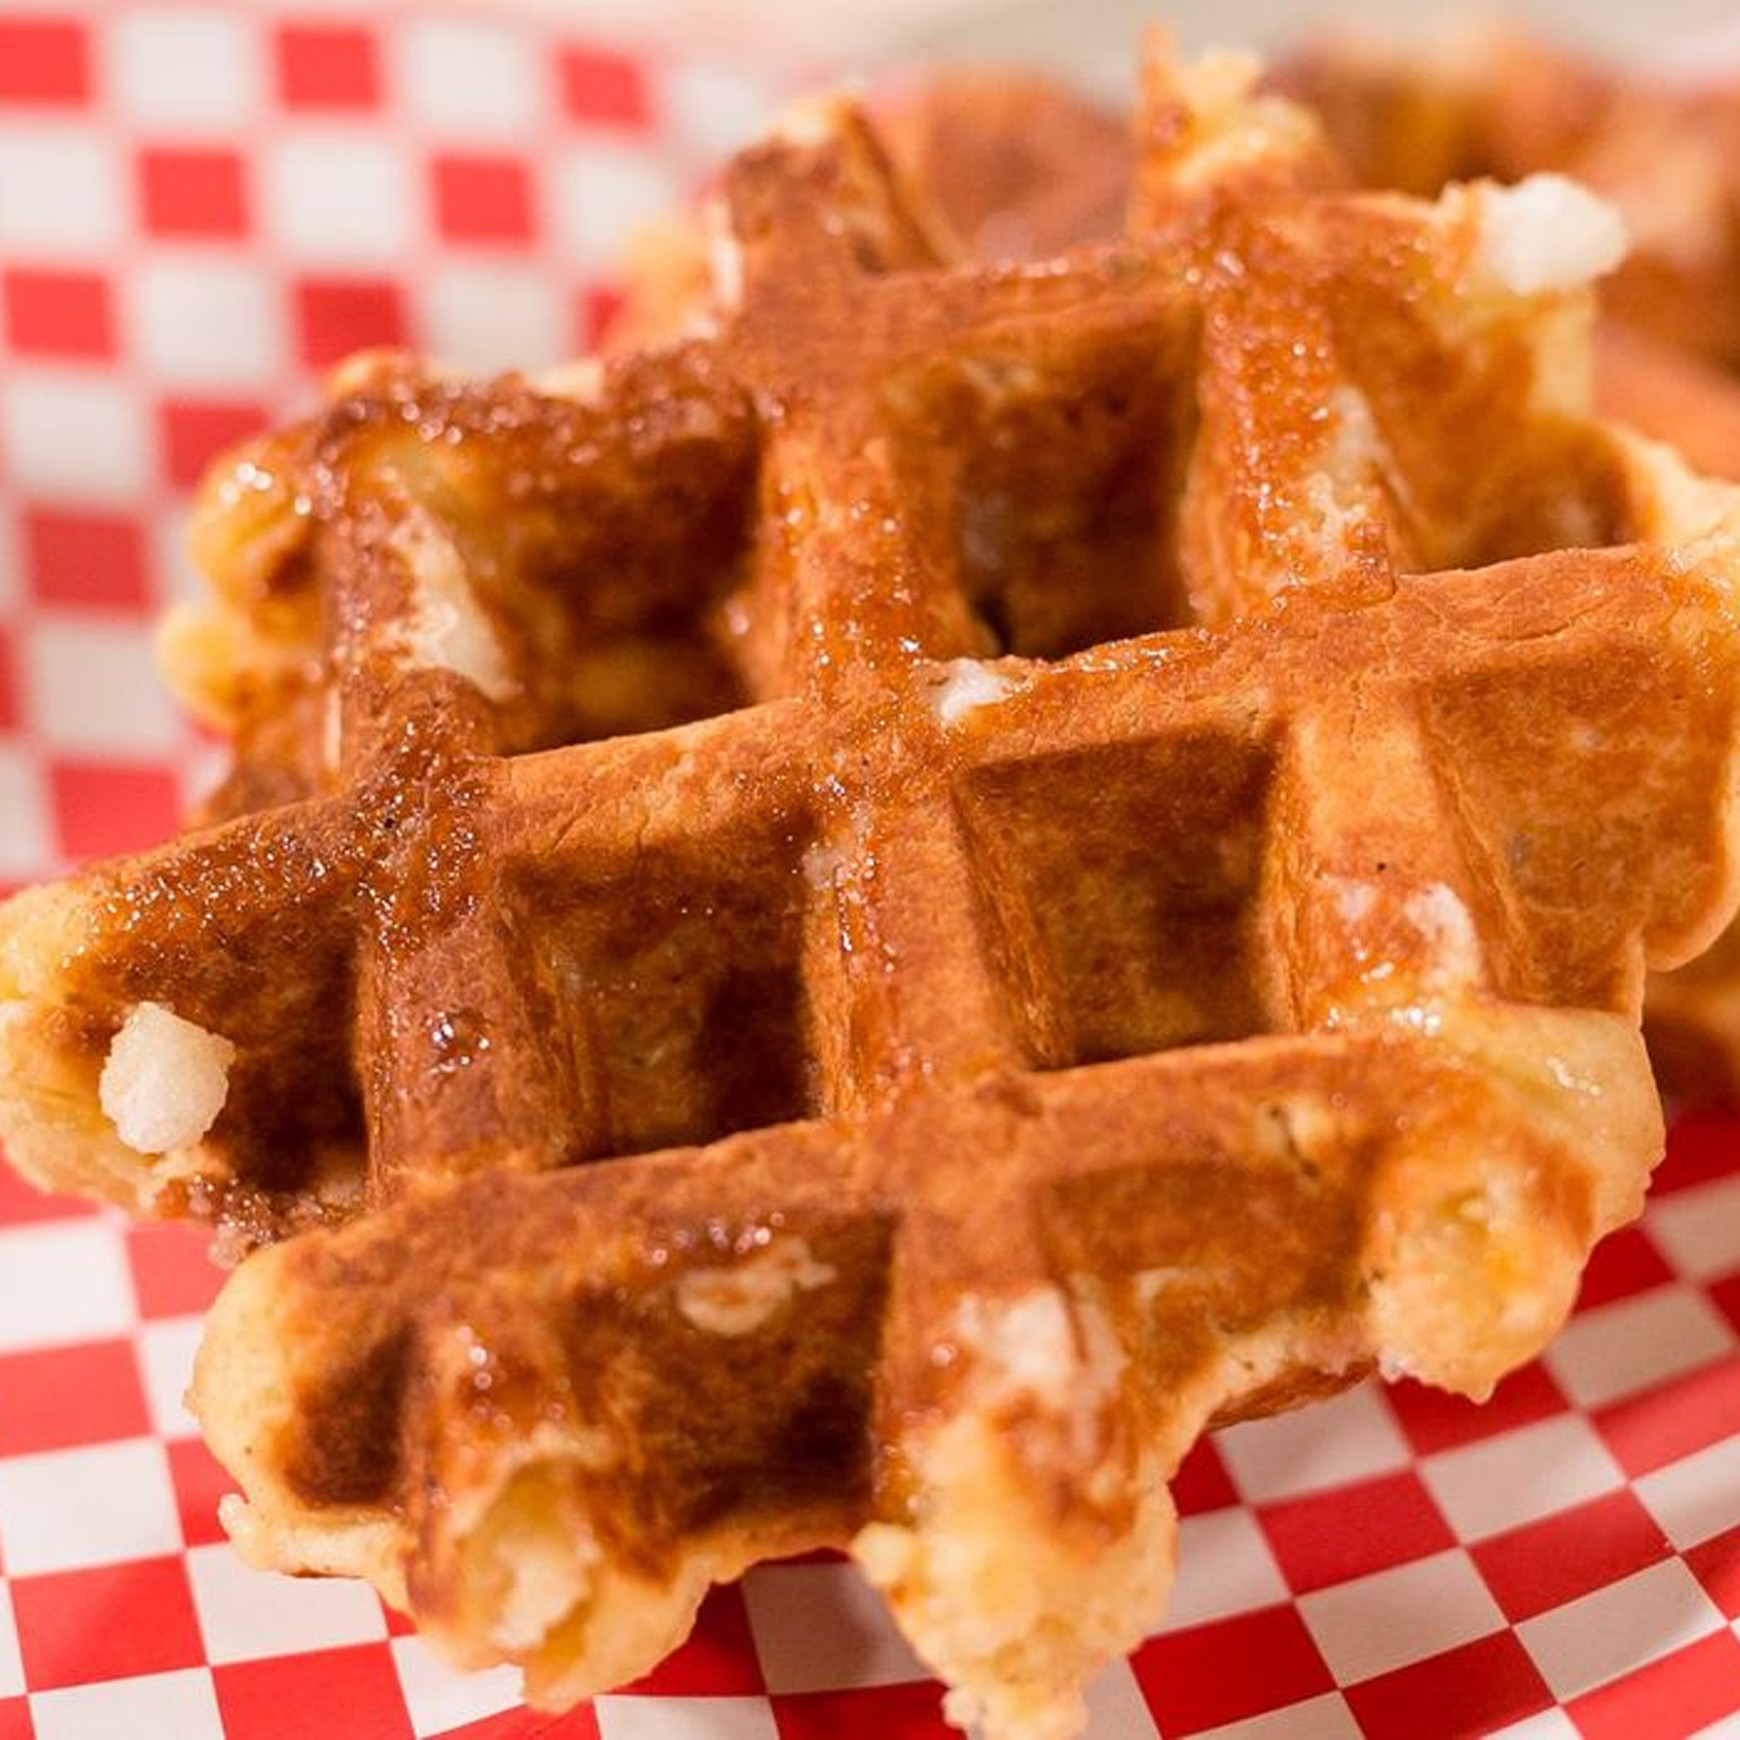 Read more about the article “Discover the secrets of the Belgian waffle”